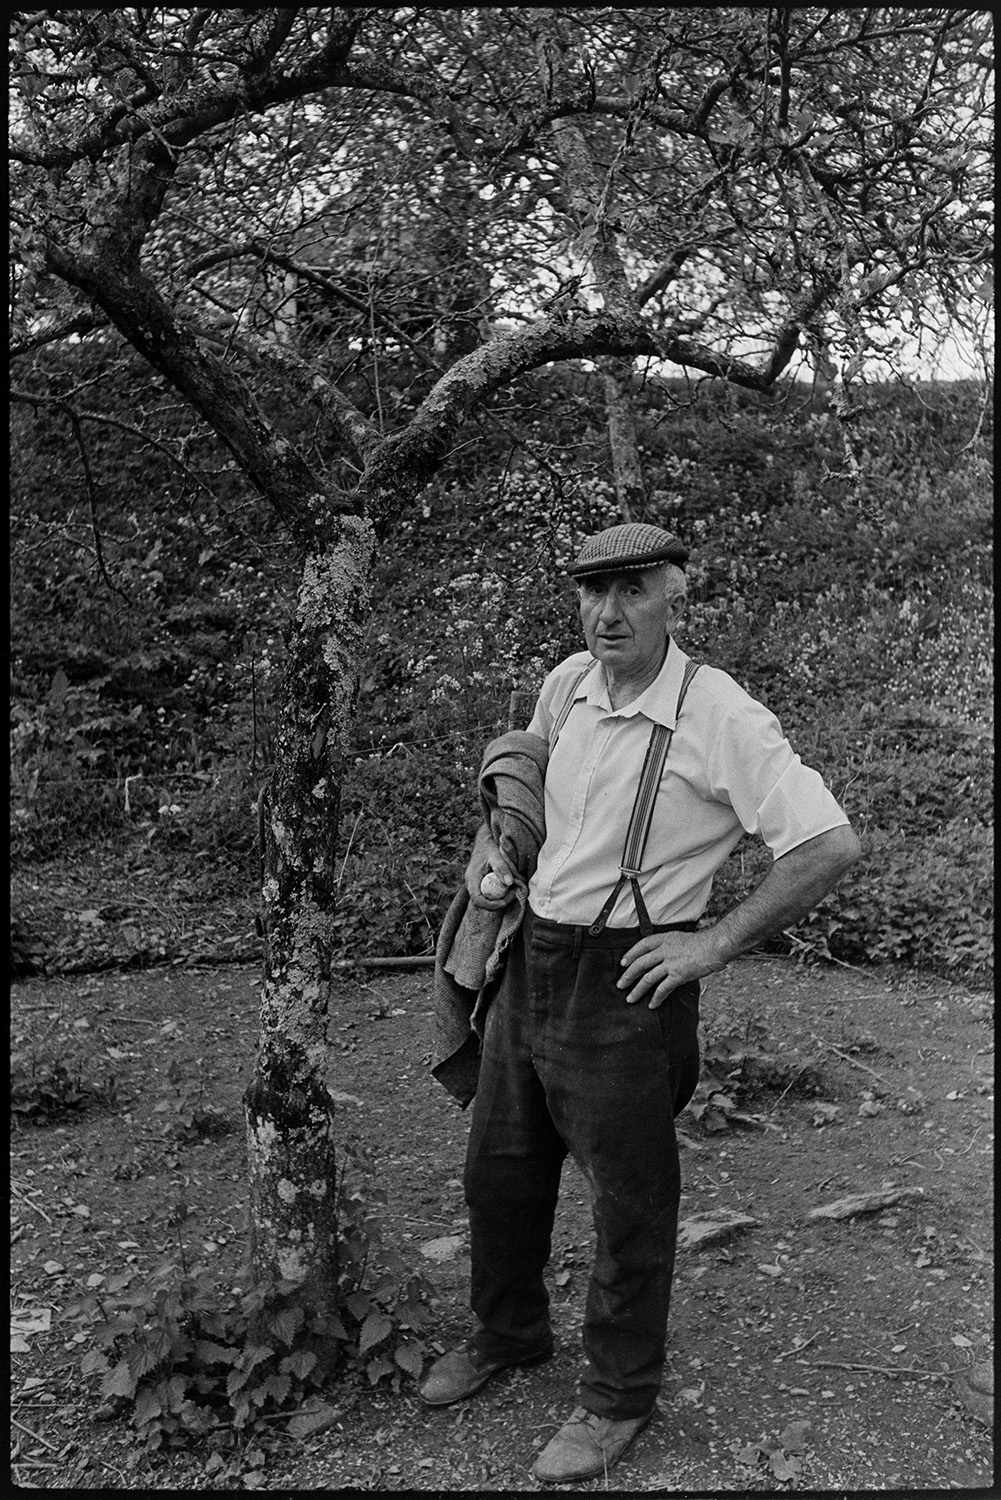 Orchards. Mazzard cherry trees in blossom,
[Walter King standing under a Mazzard cherry tree in an orchard at Harford, Landkey.]